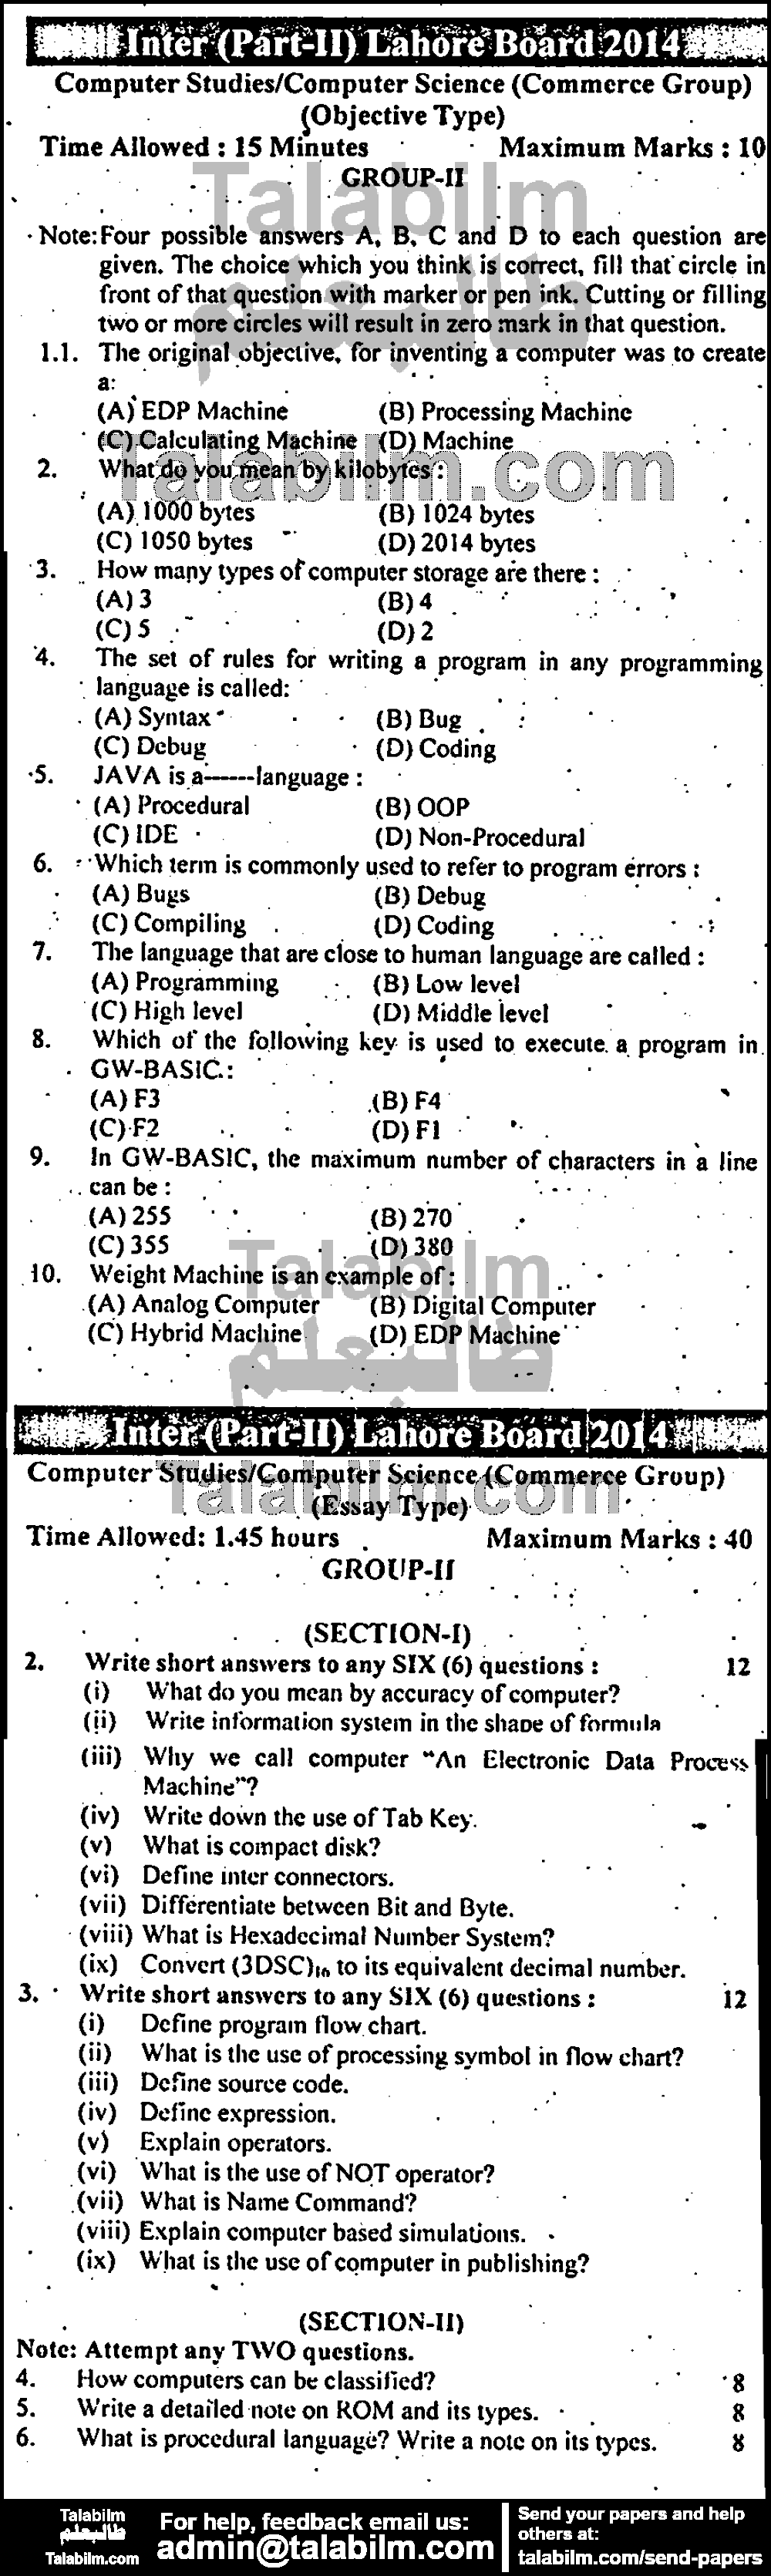 Computer Science 0 past paper for Group-II 2014